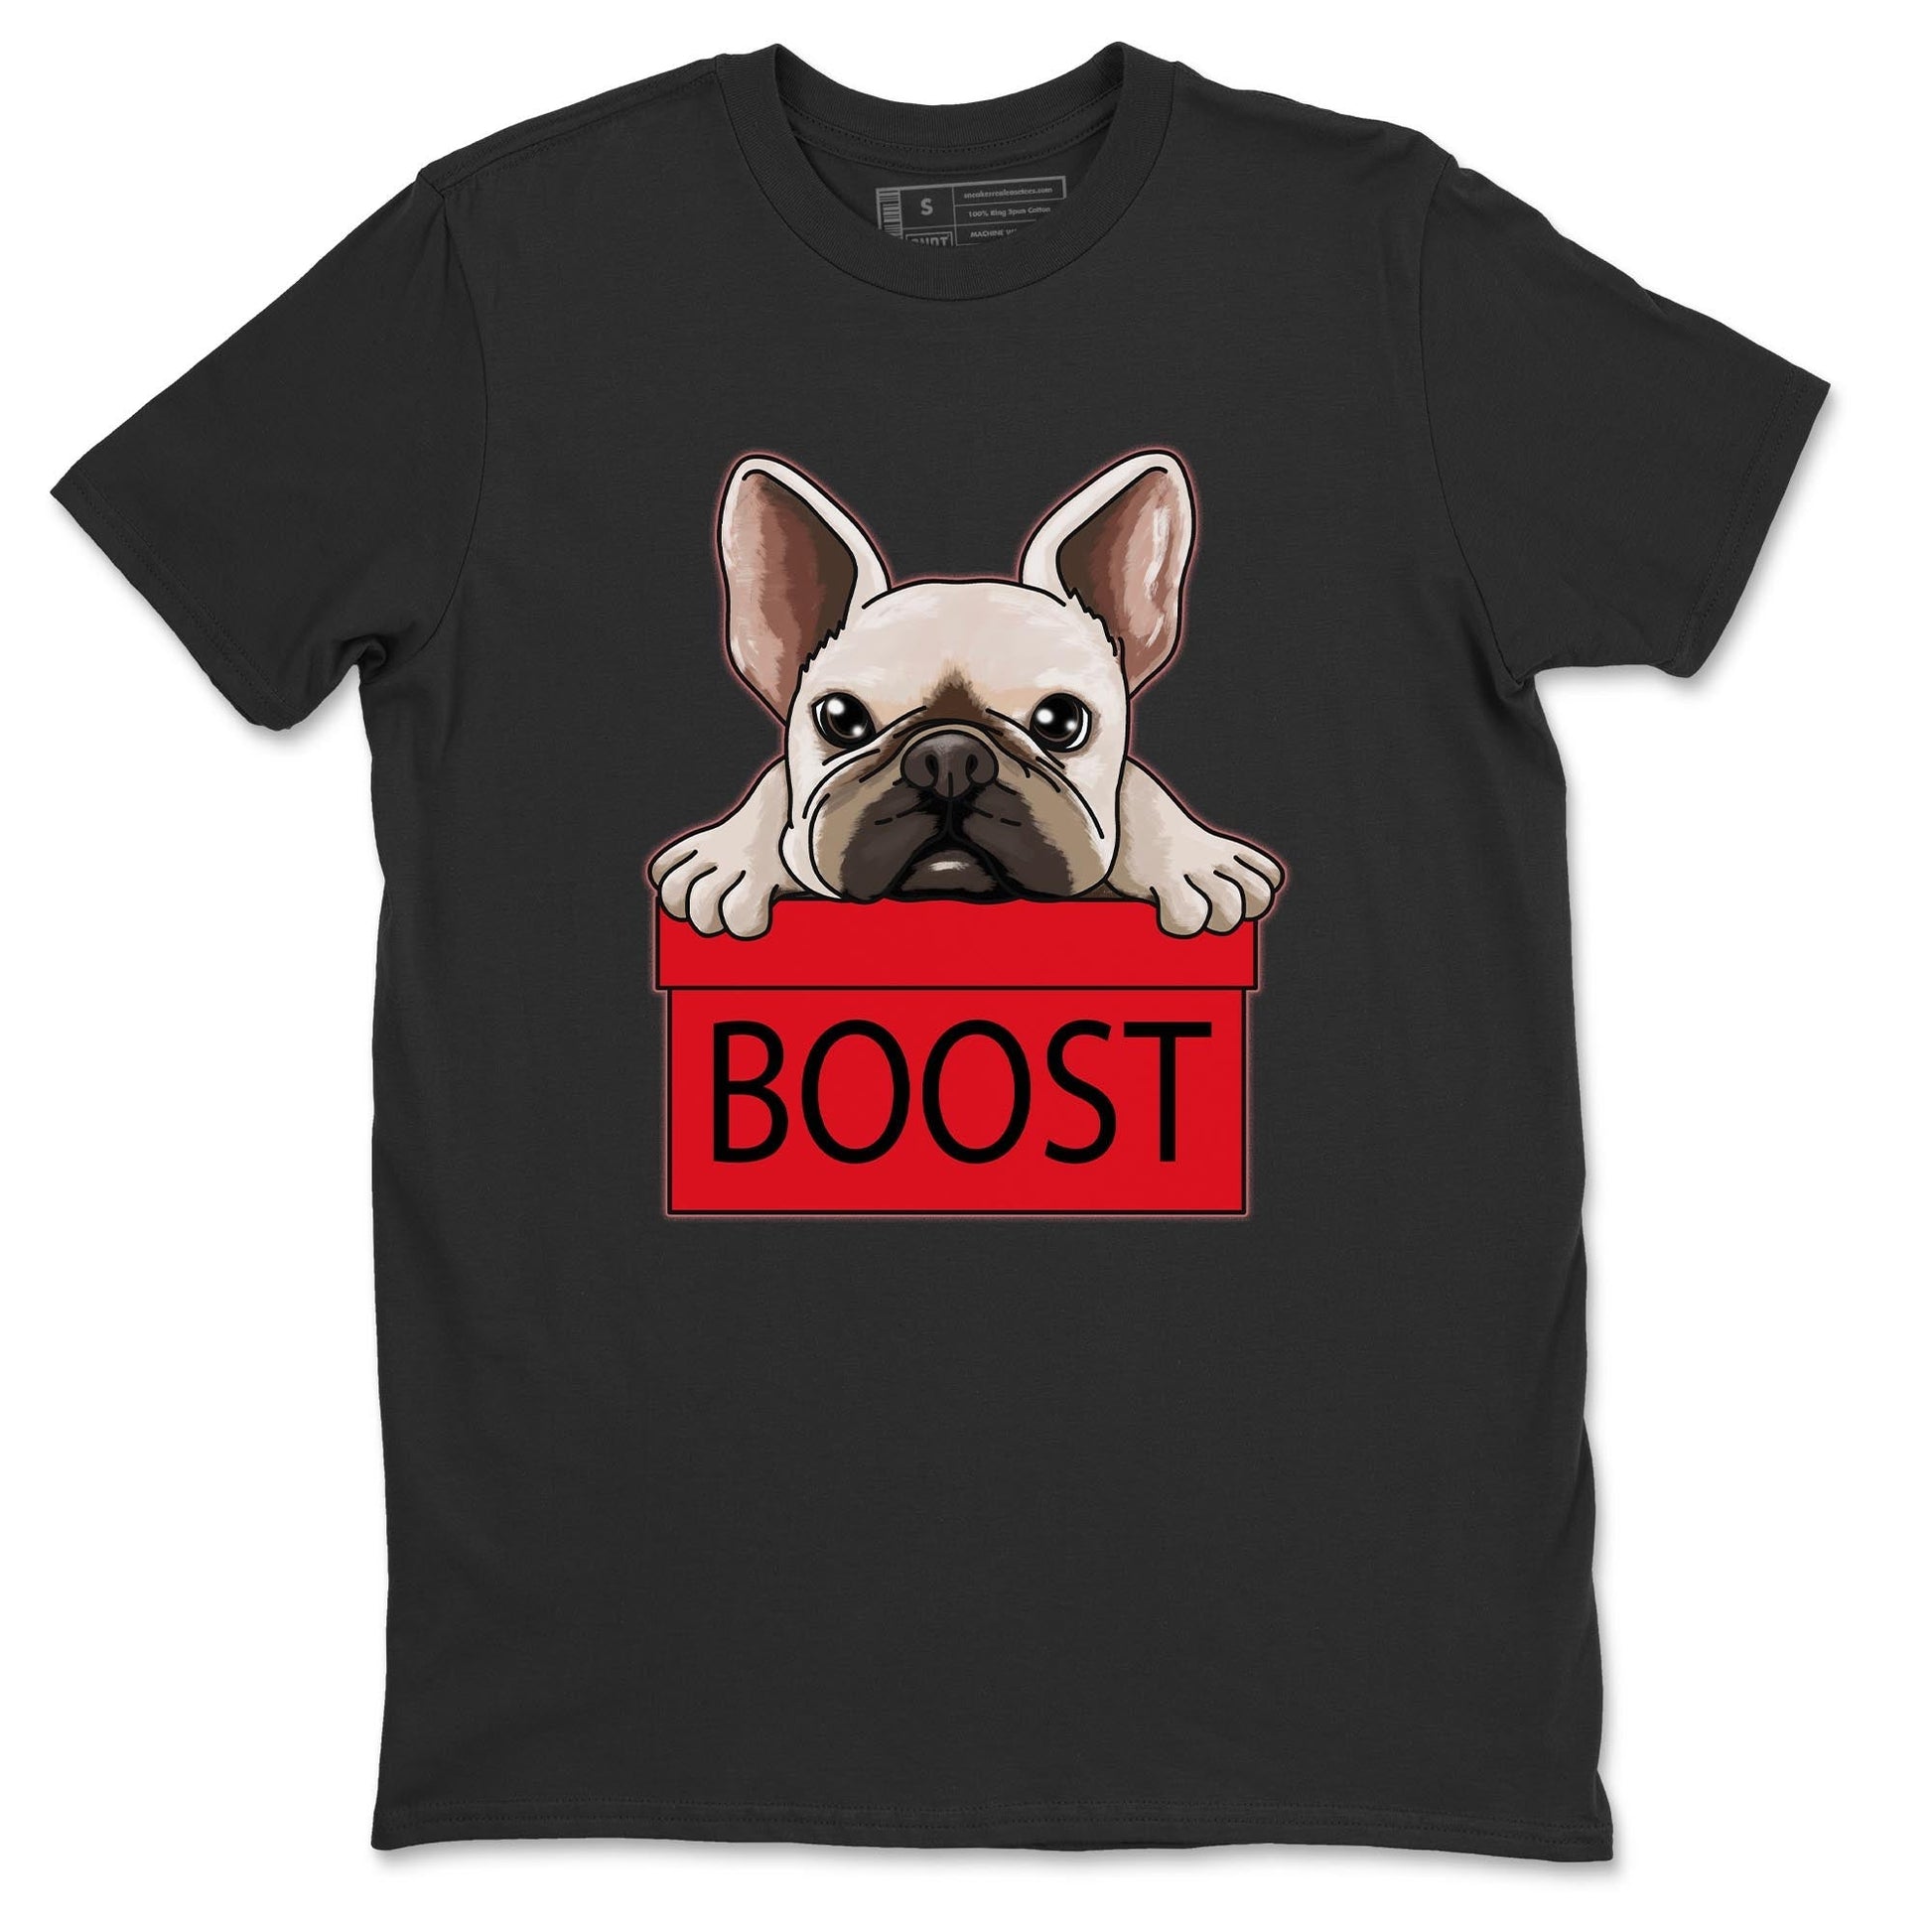 Yeezy 700 Hi-Res Red Sneaker Match Tees French Bulldog Sneaker Tees Yeezy 700 Hi-Res Red Sneaker Release Tees Unisex Shirts